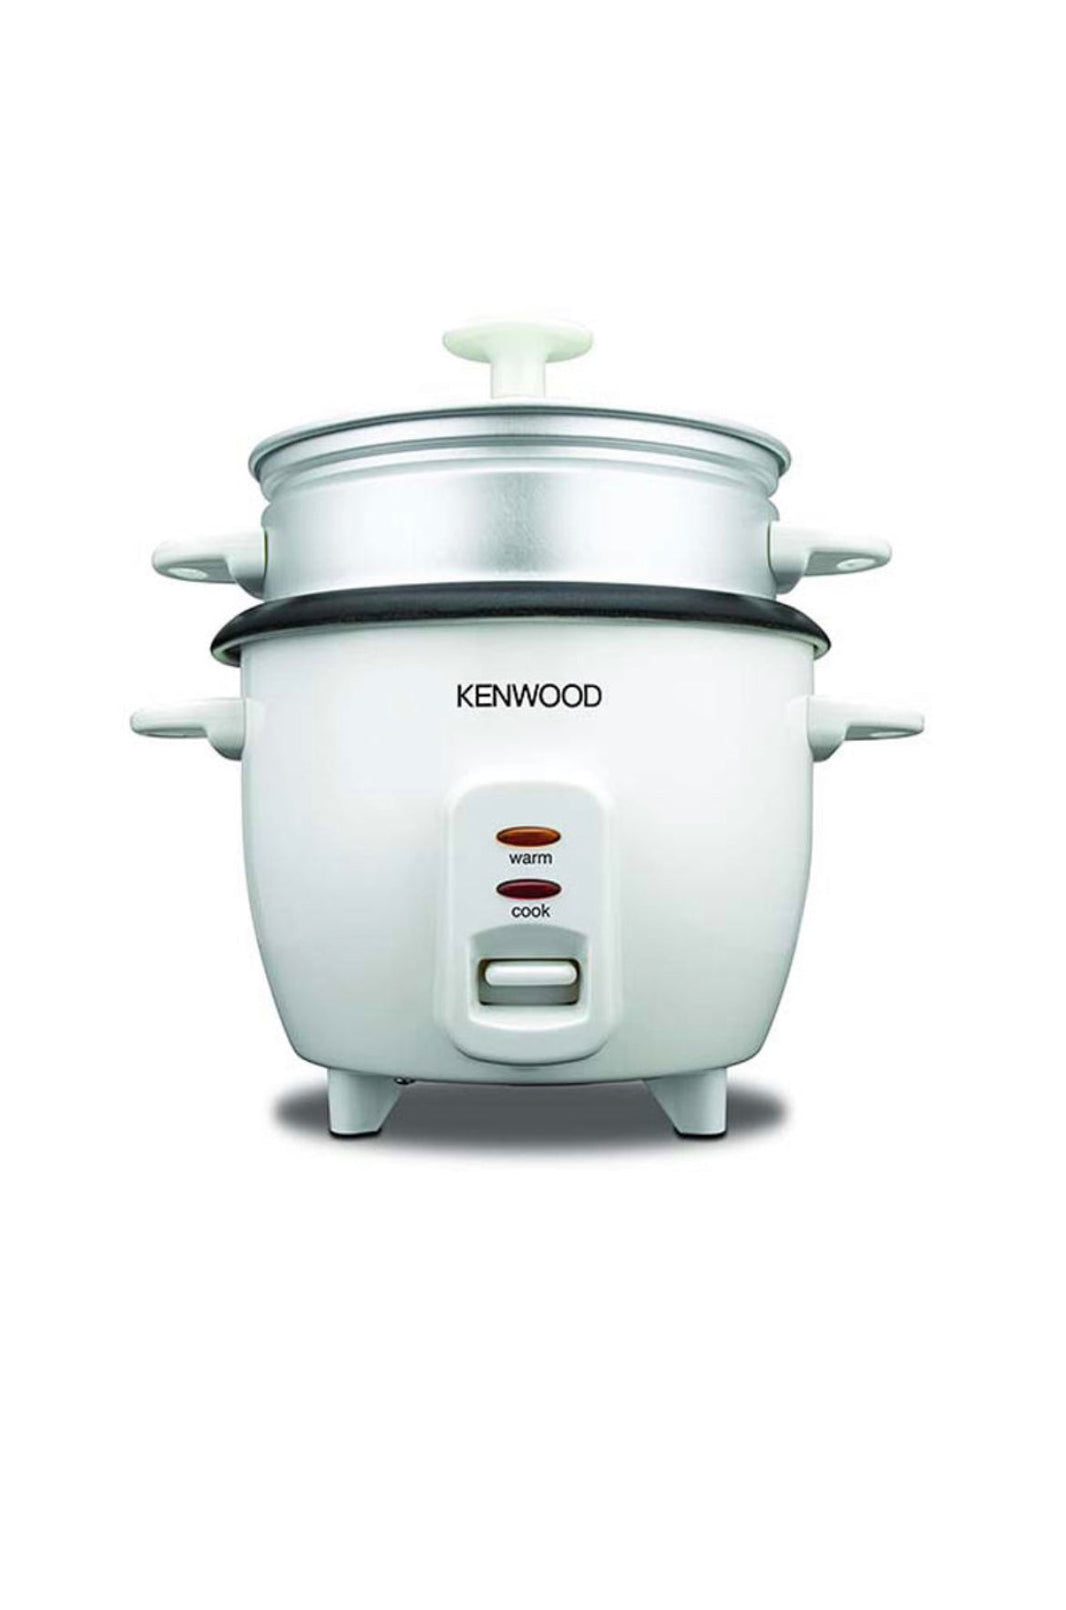 Kenwood Non Stick Rice Cooker With Fade Proof Construction 0.6 l 350 W